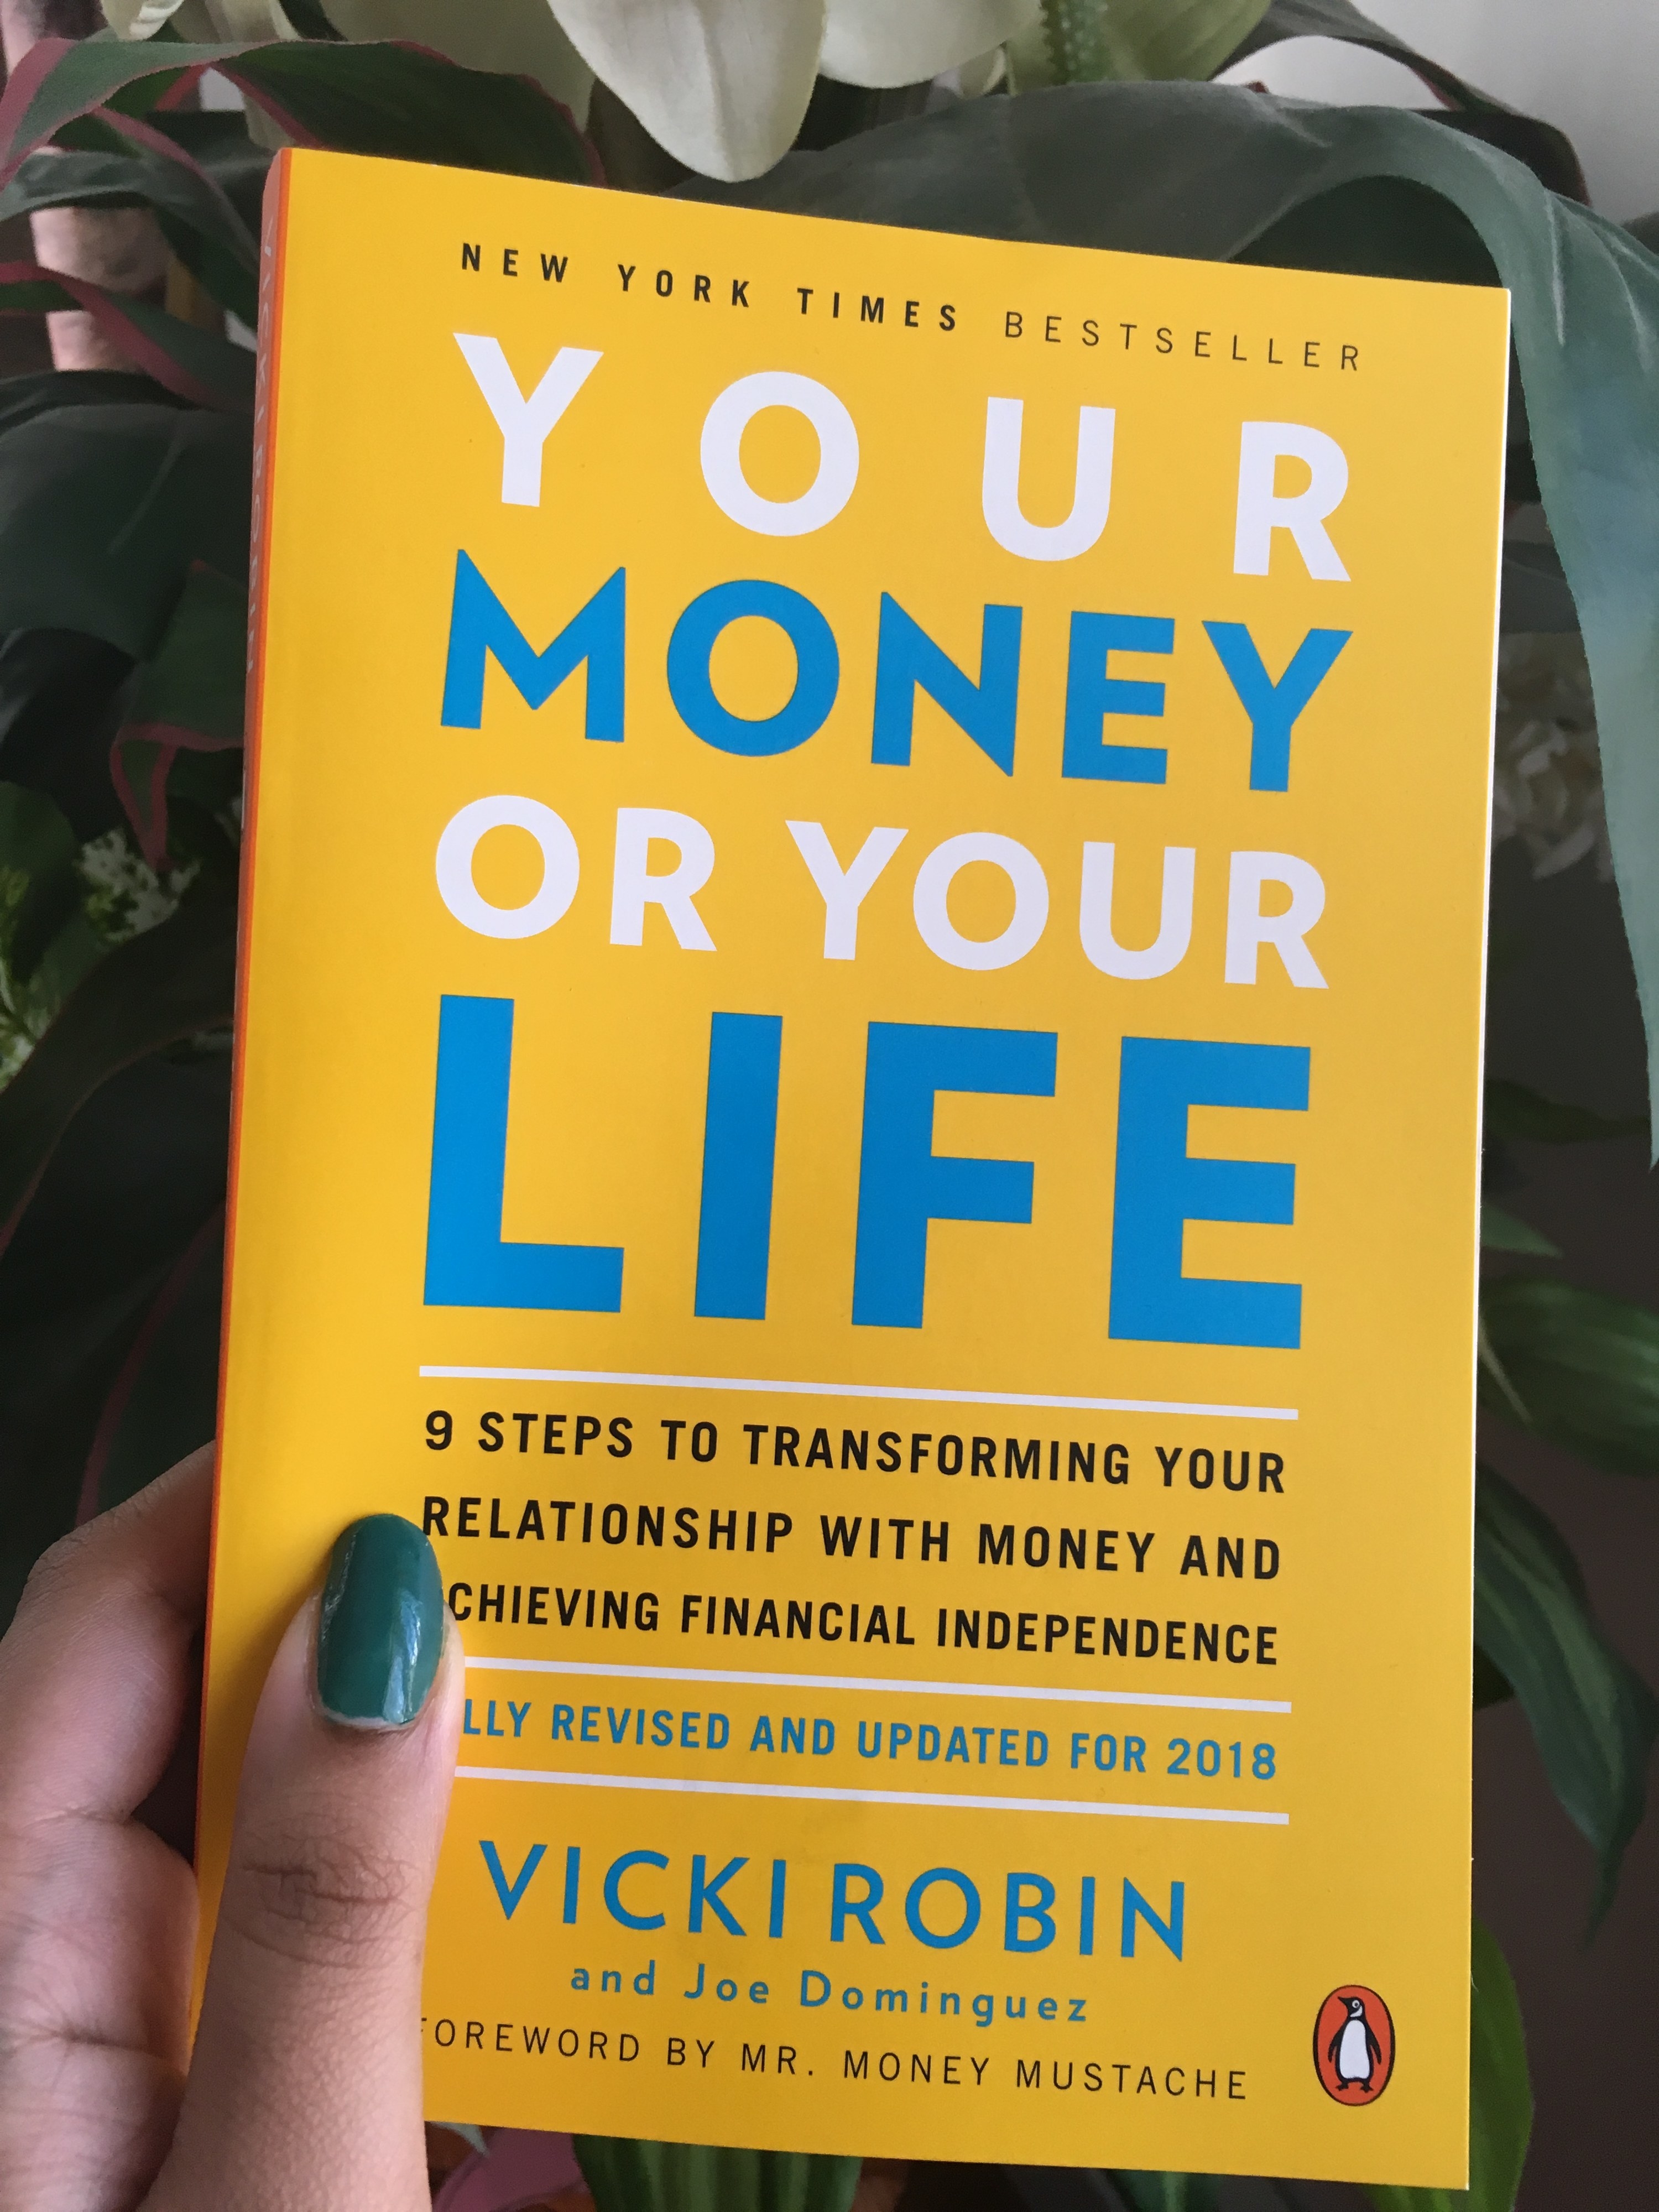 Nine steps to transforming your relationship with money and achieving financial independence